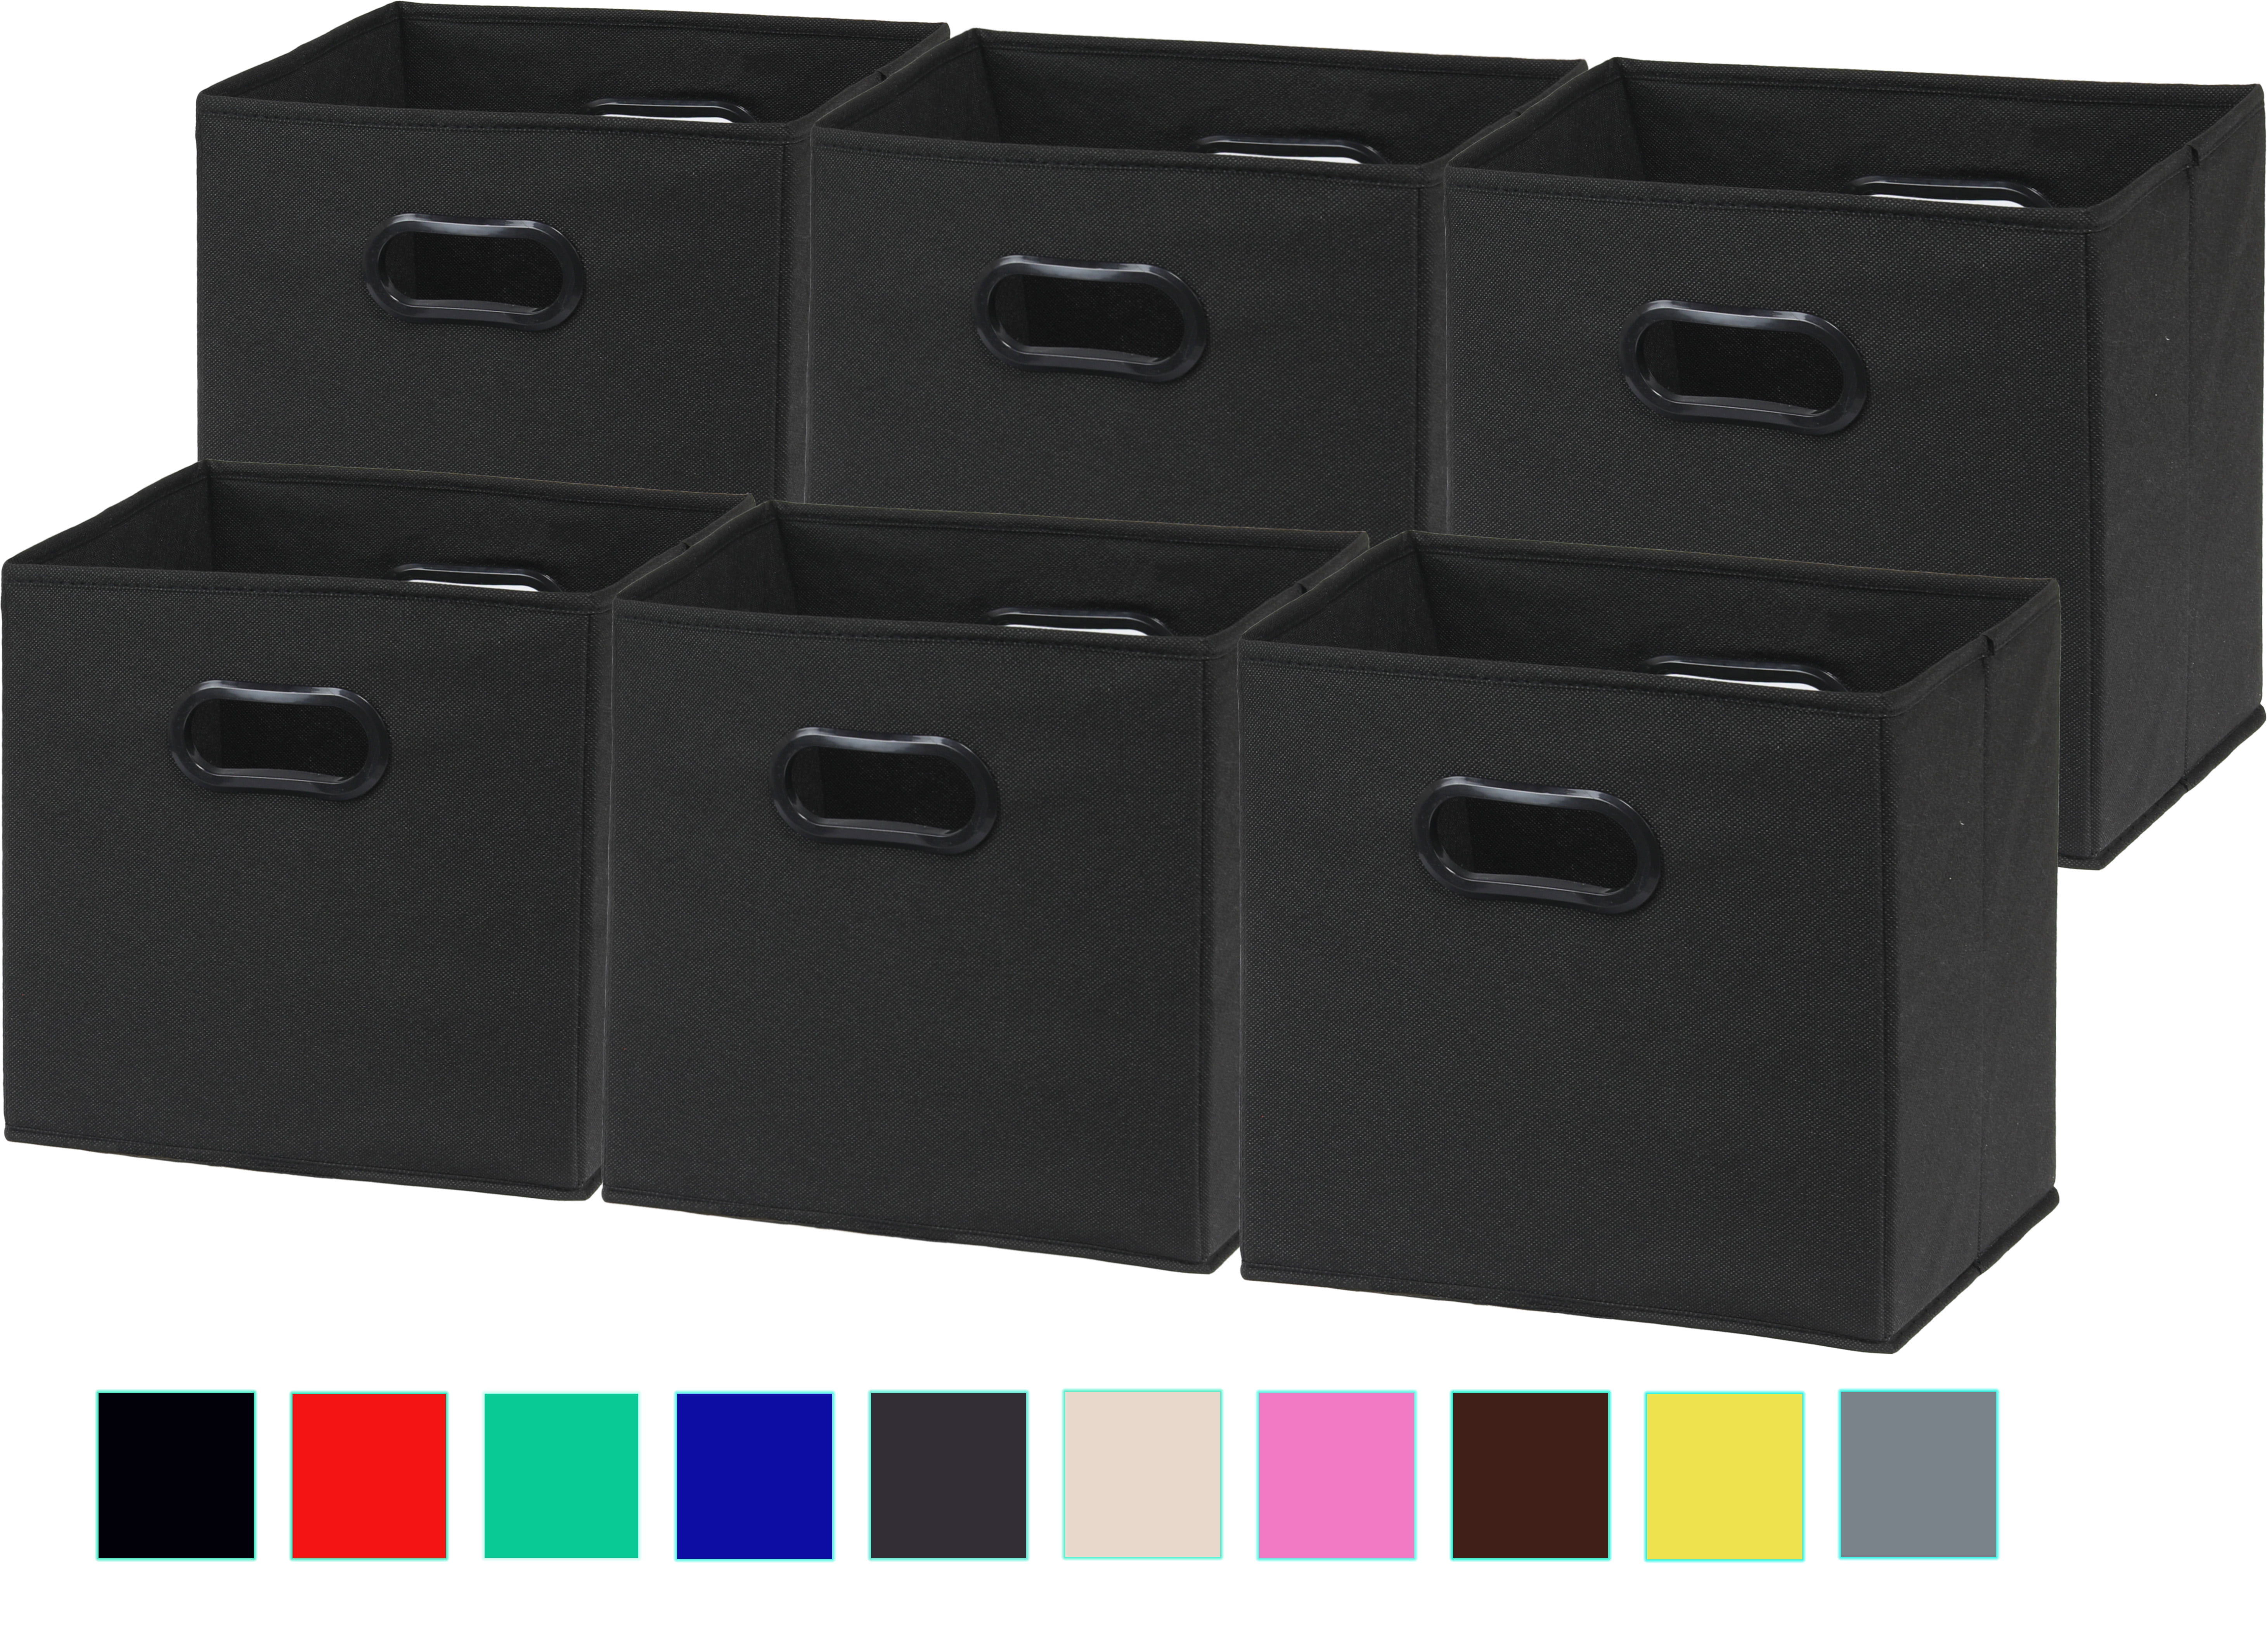 Dropship Fabric Storage Cubes With Handle, Foldable Cube Storage Bins, 6  Pack Storage Baskets For Shelves, Storage Boxes For Organizing Closet Bins,  Wood Grain to Sell Online at a Lower Price